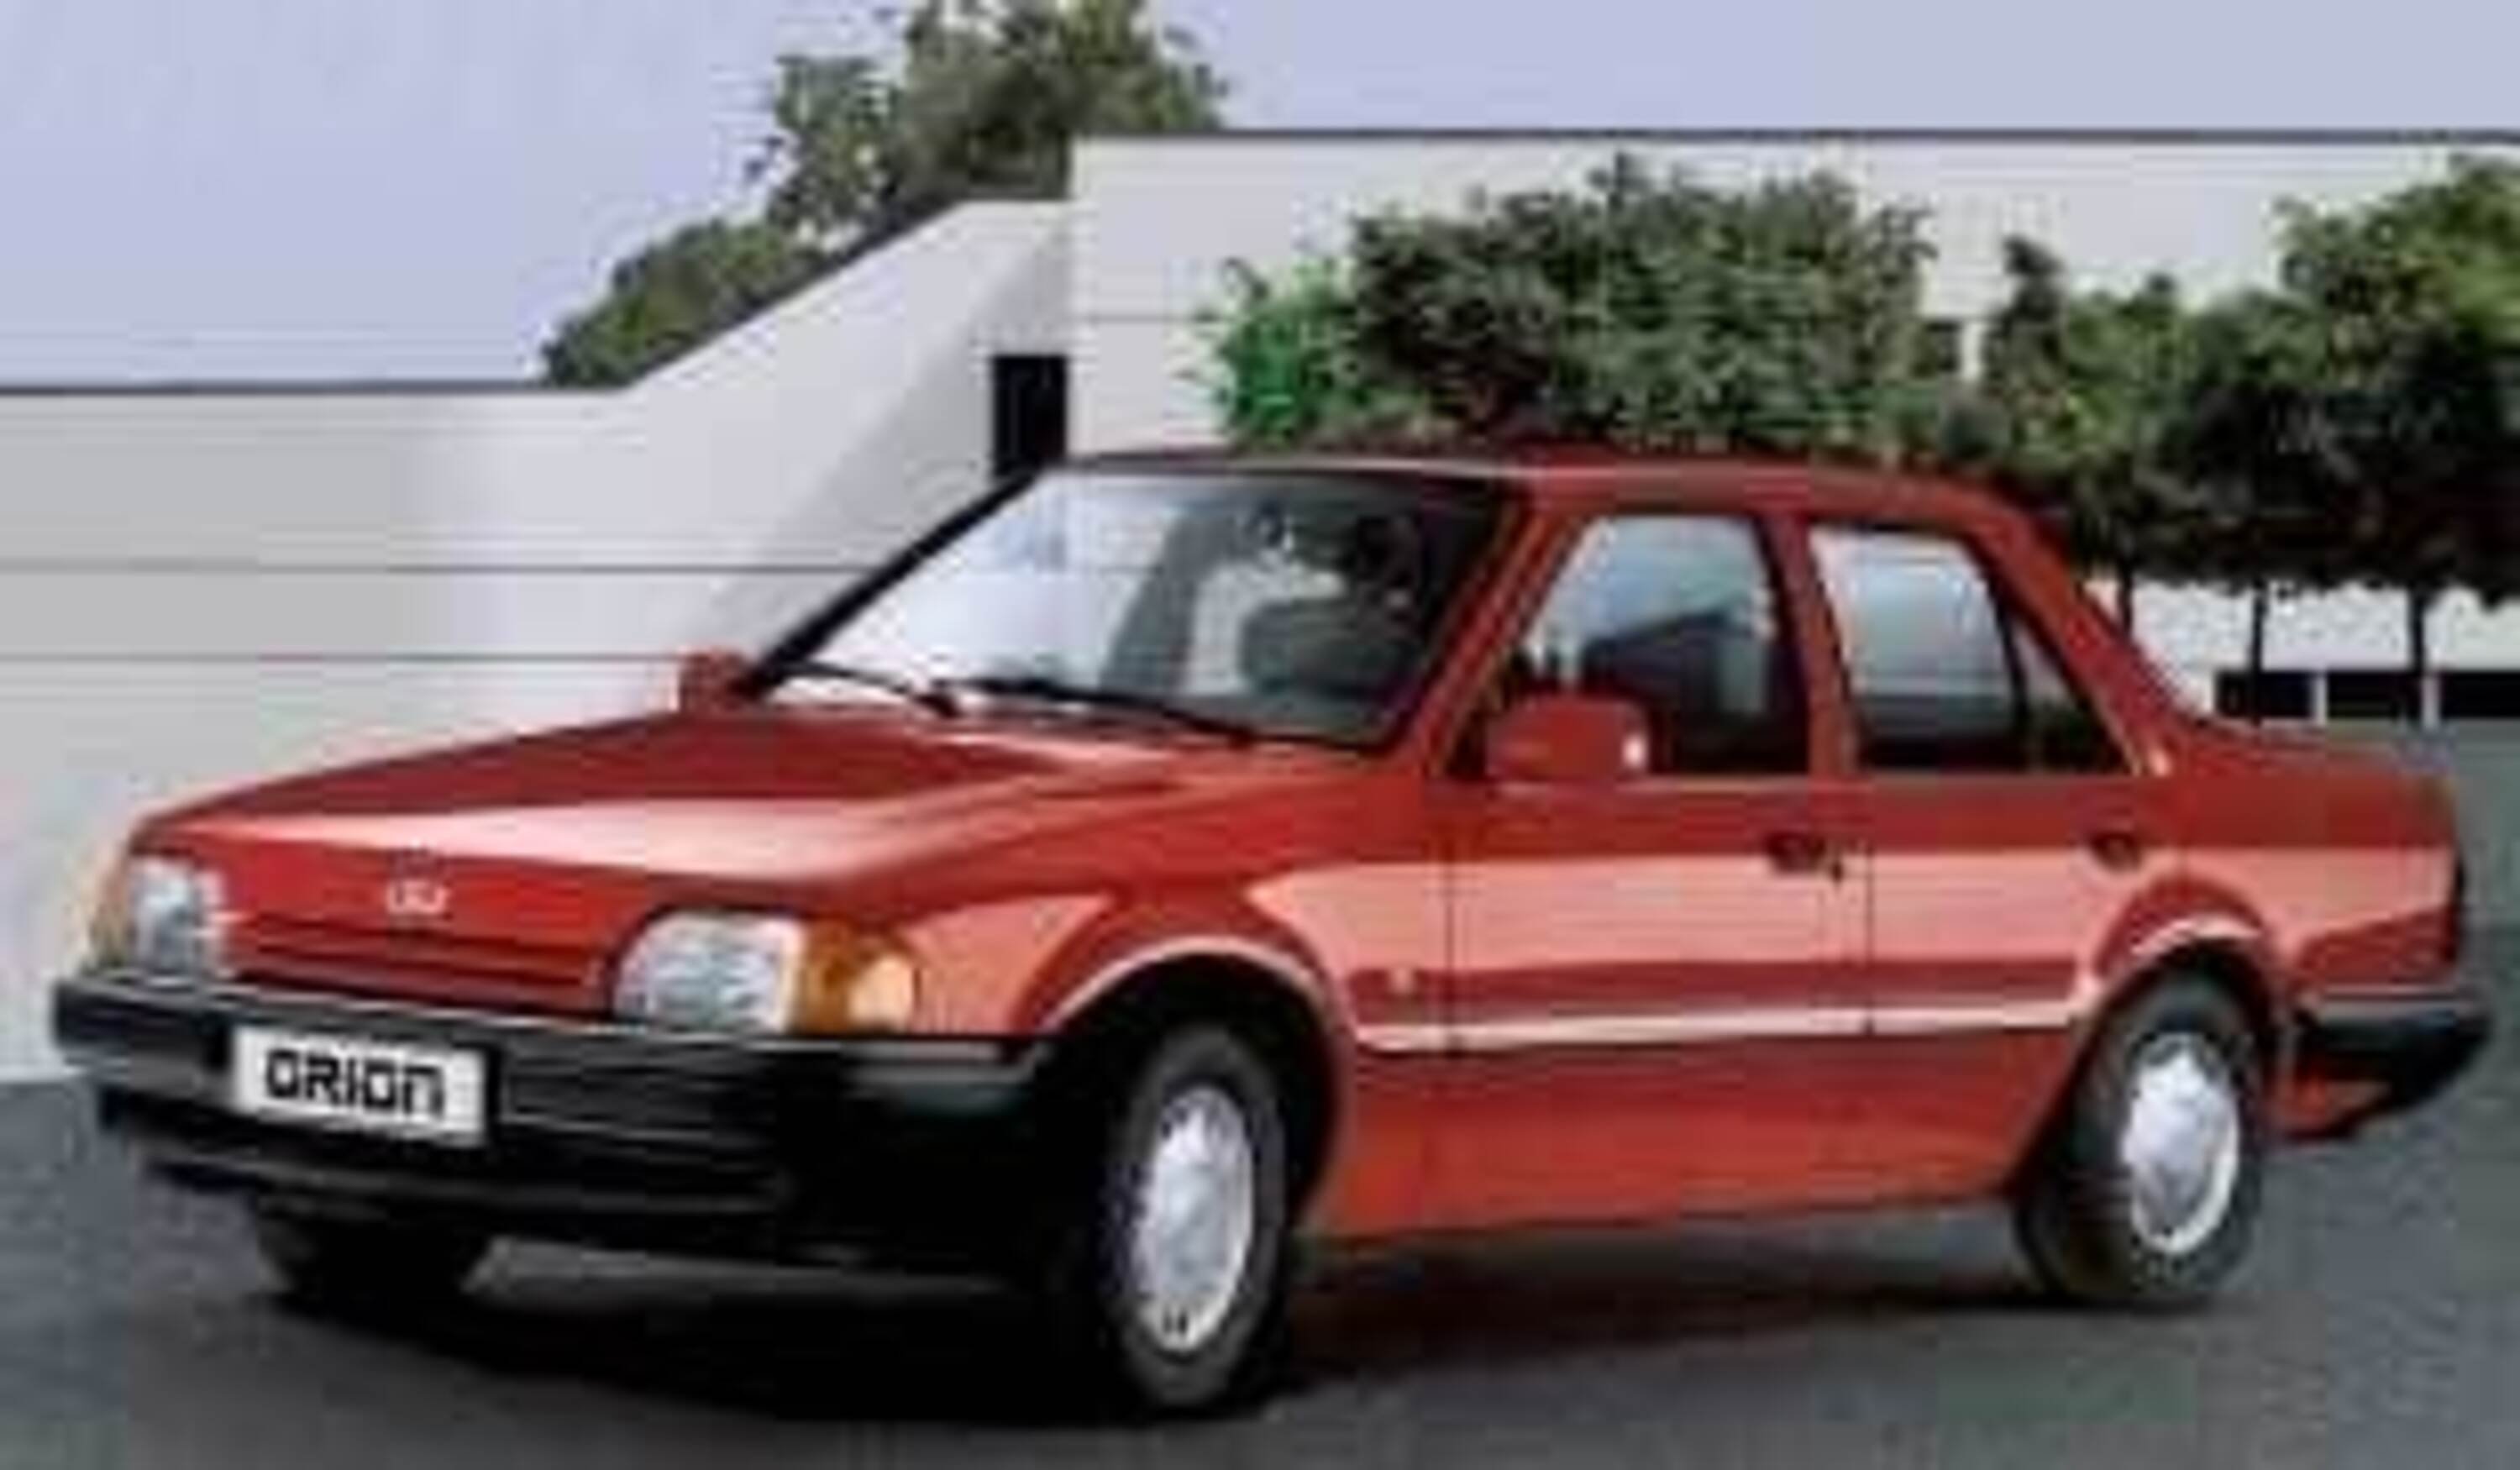 Ford Orion 1.6 diesel CLX 